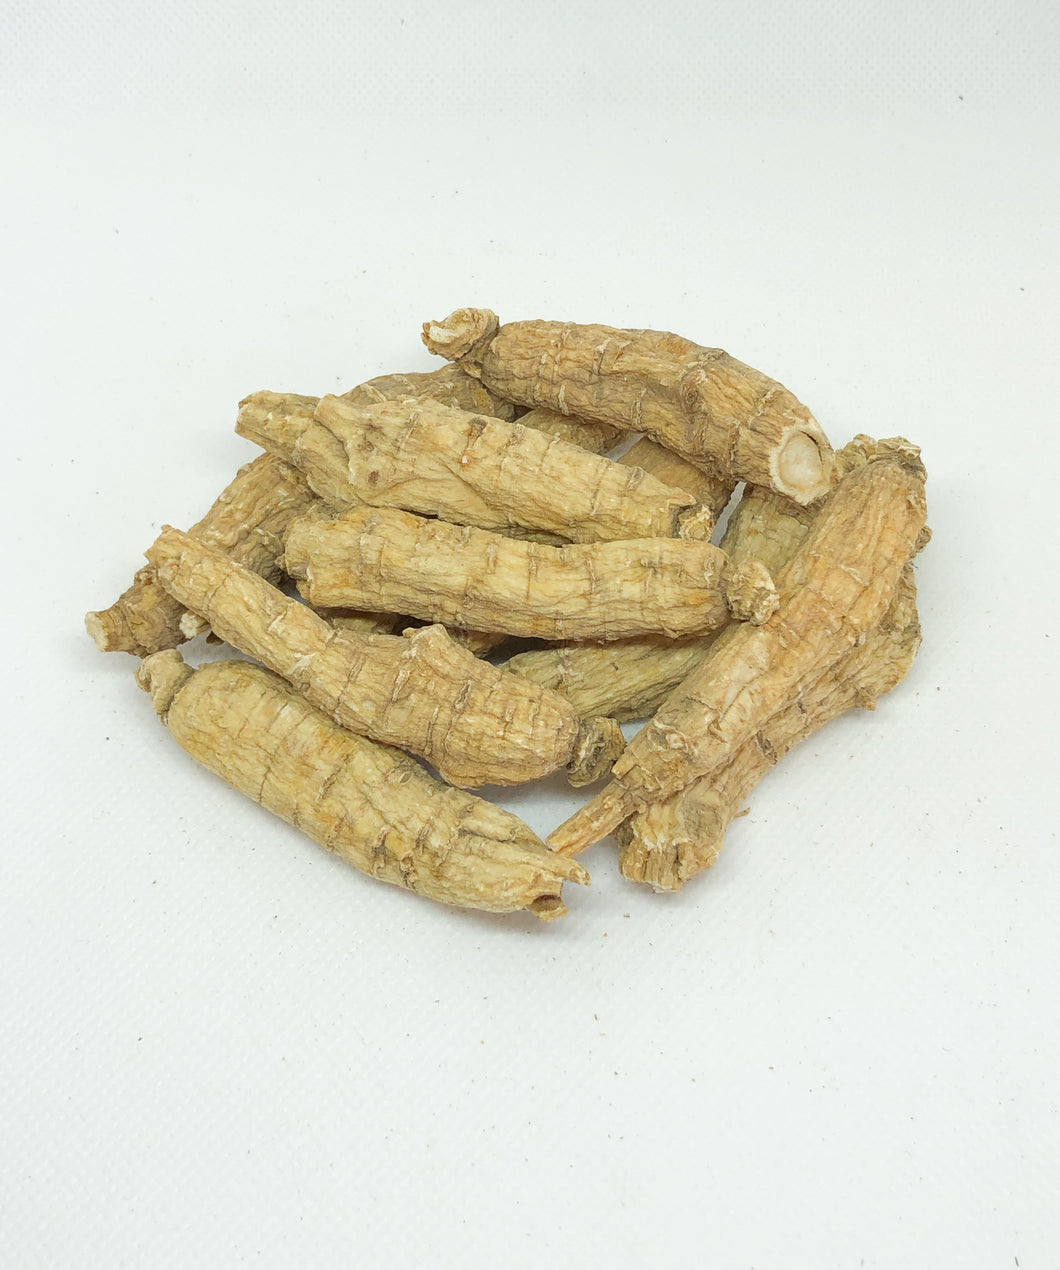 Graded Short Large Wisconsin Grown American Ginseng By The Pound